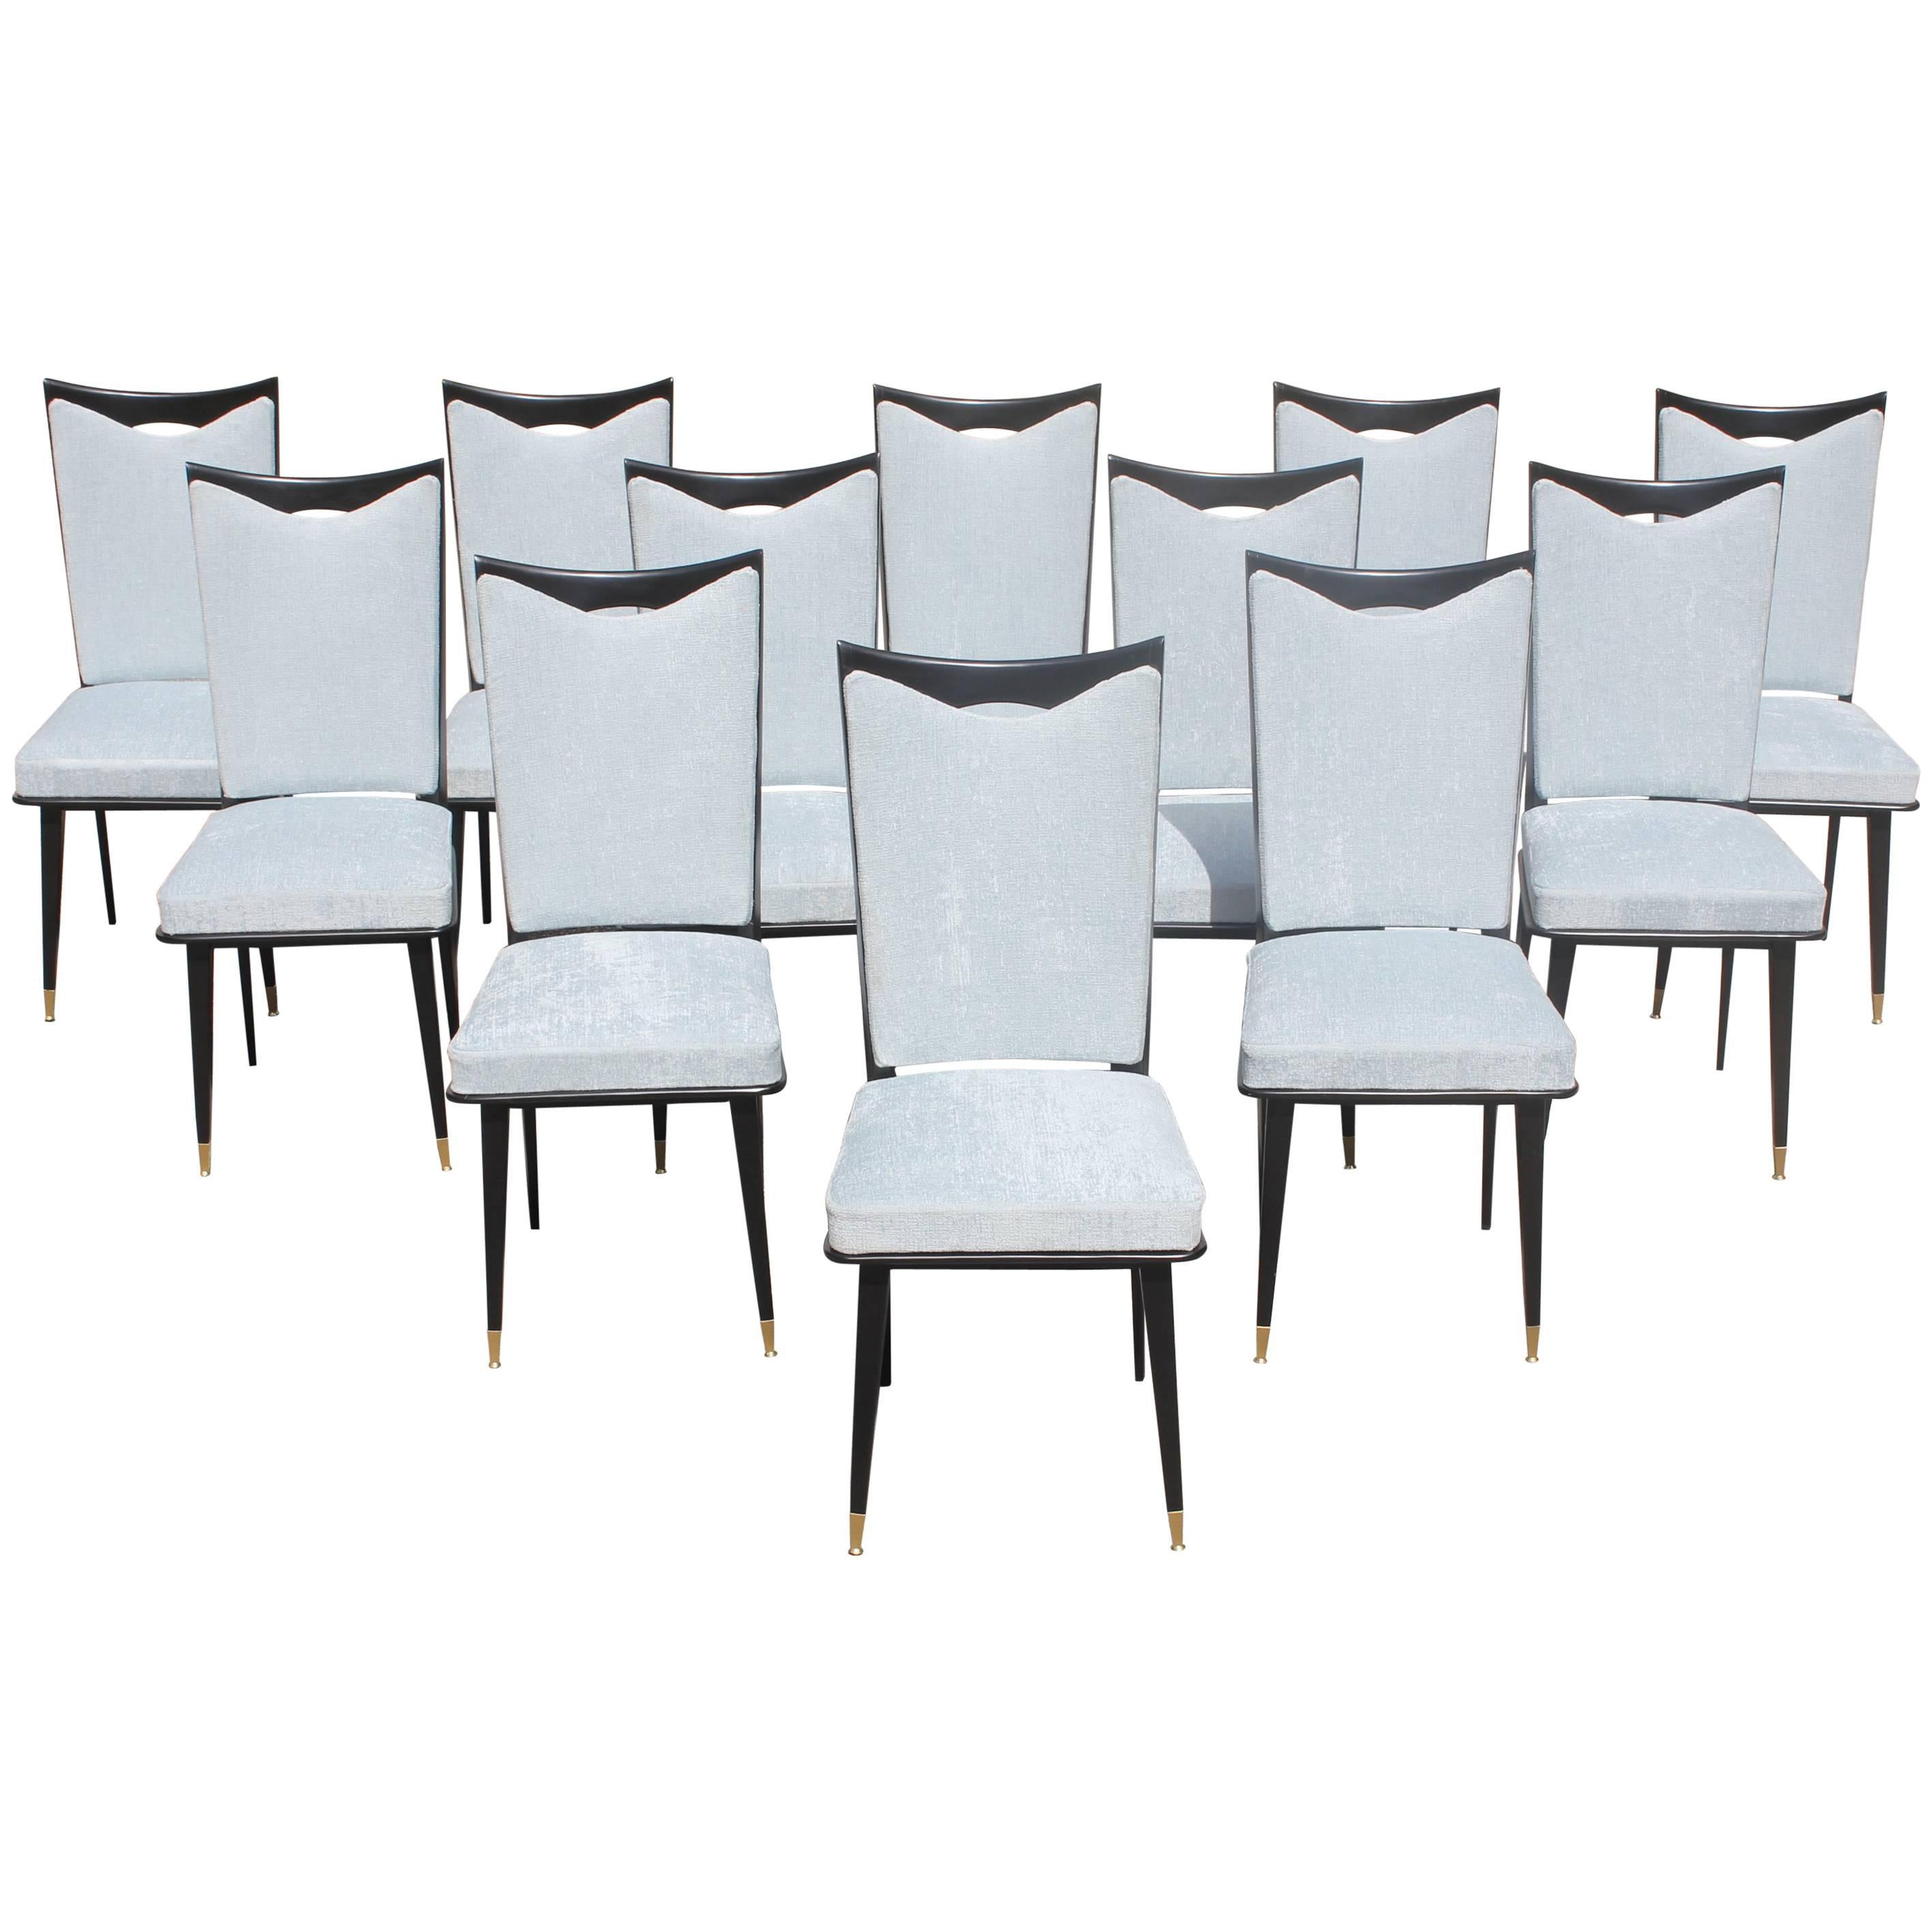 Monumental Set of 12 French Art Deco Dining Chairs, circa 1940s